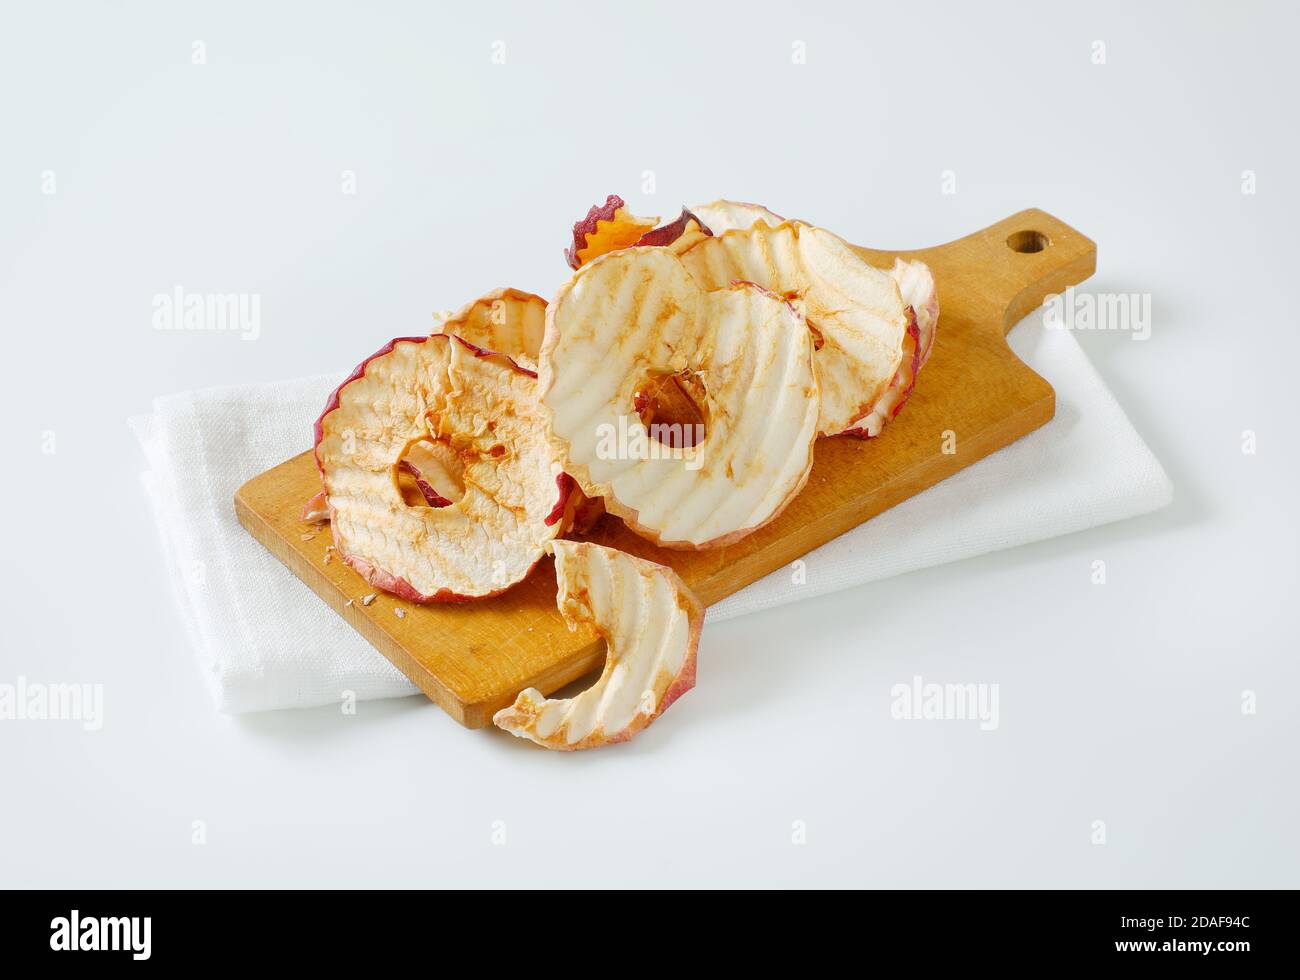 Dried apple chips or rings on cutting board Stock Photo